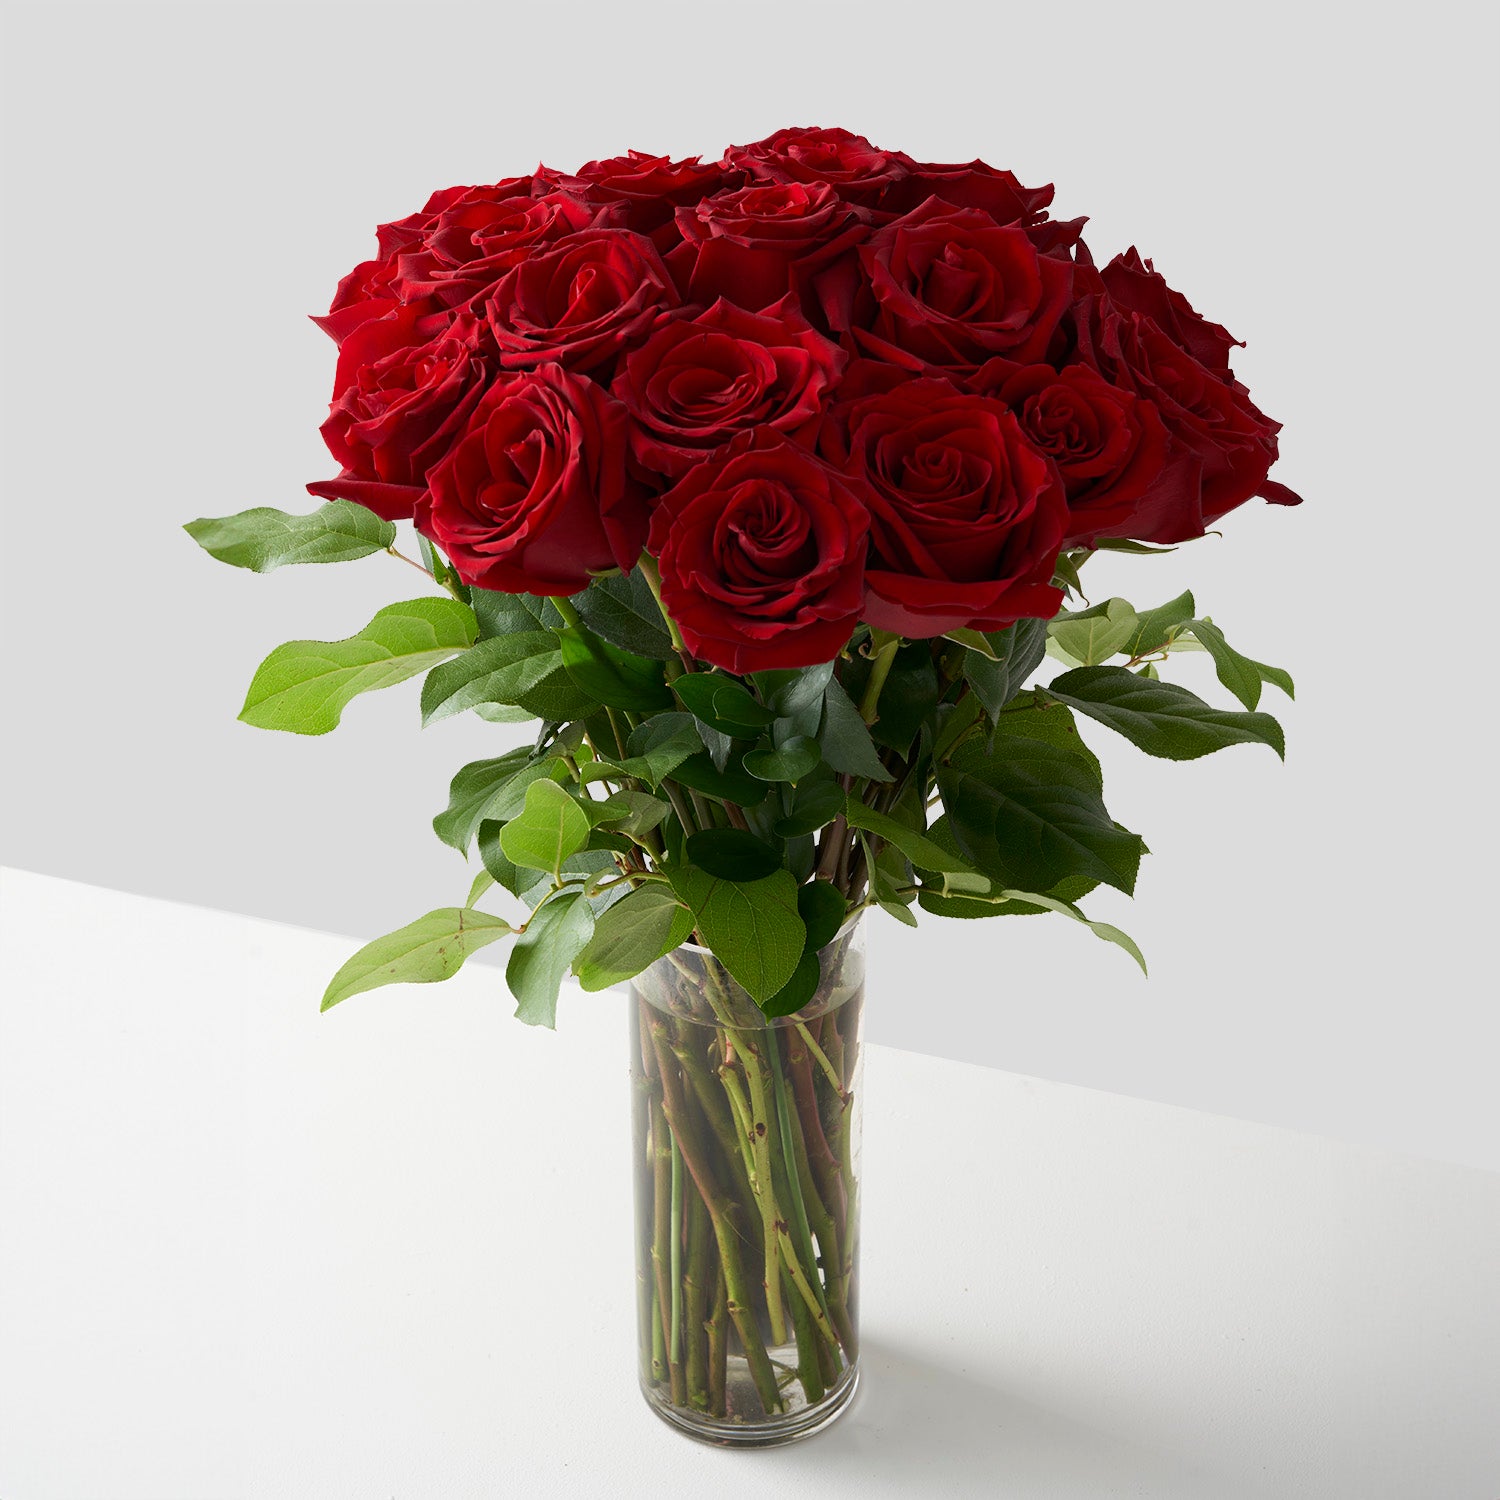 twenty-four red roses arranged with leaves in simple glass vase.